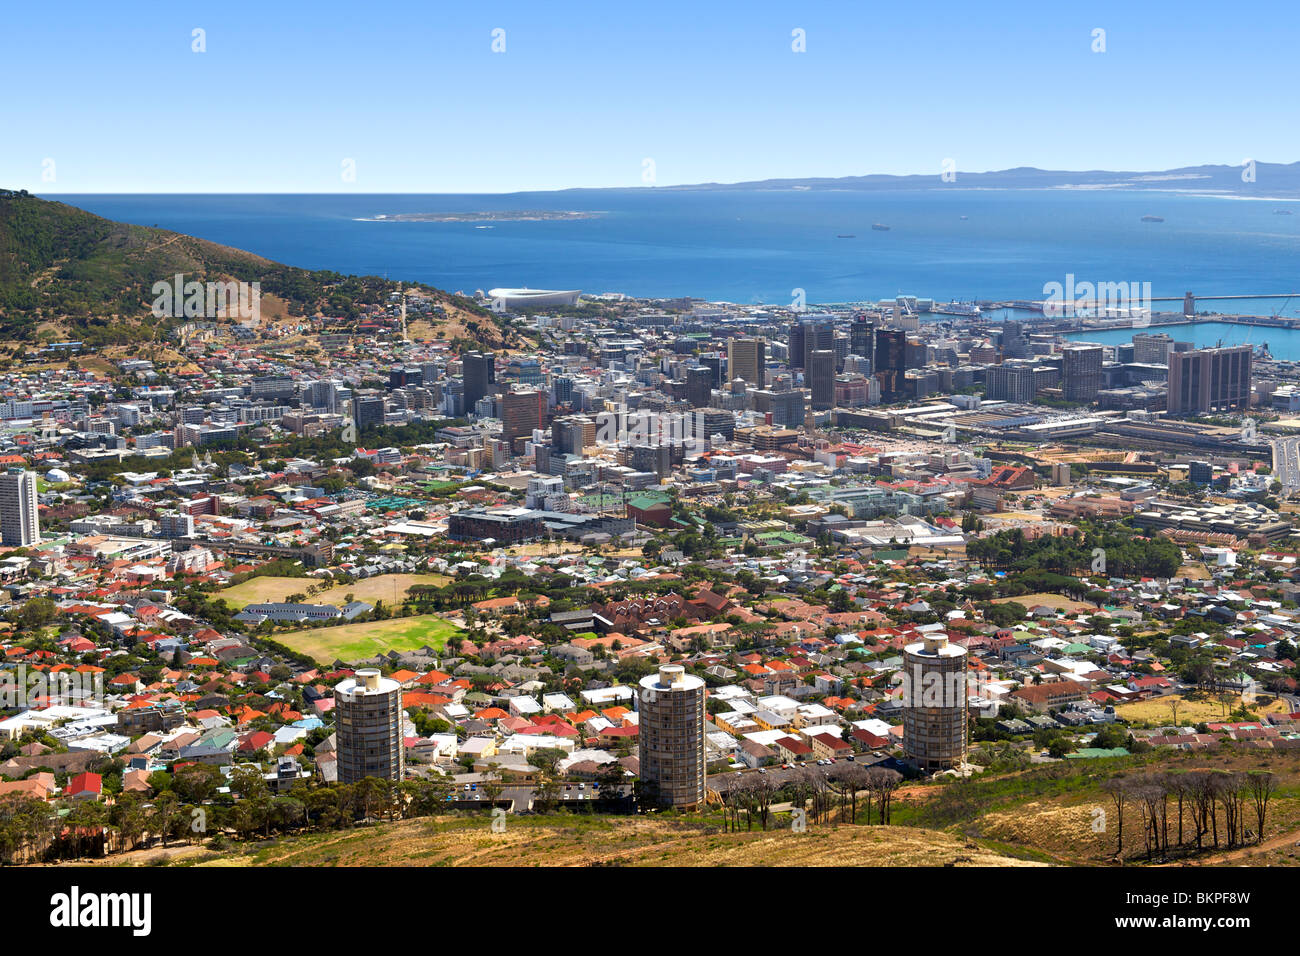 View across the city of Cape Town with the new FIFA 2010 / Green Point stadium and Robben Island in the background. Stock Photo